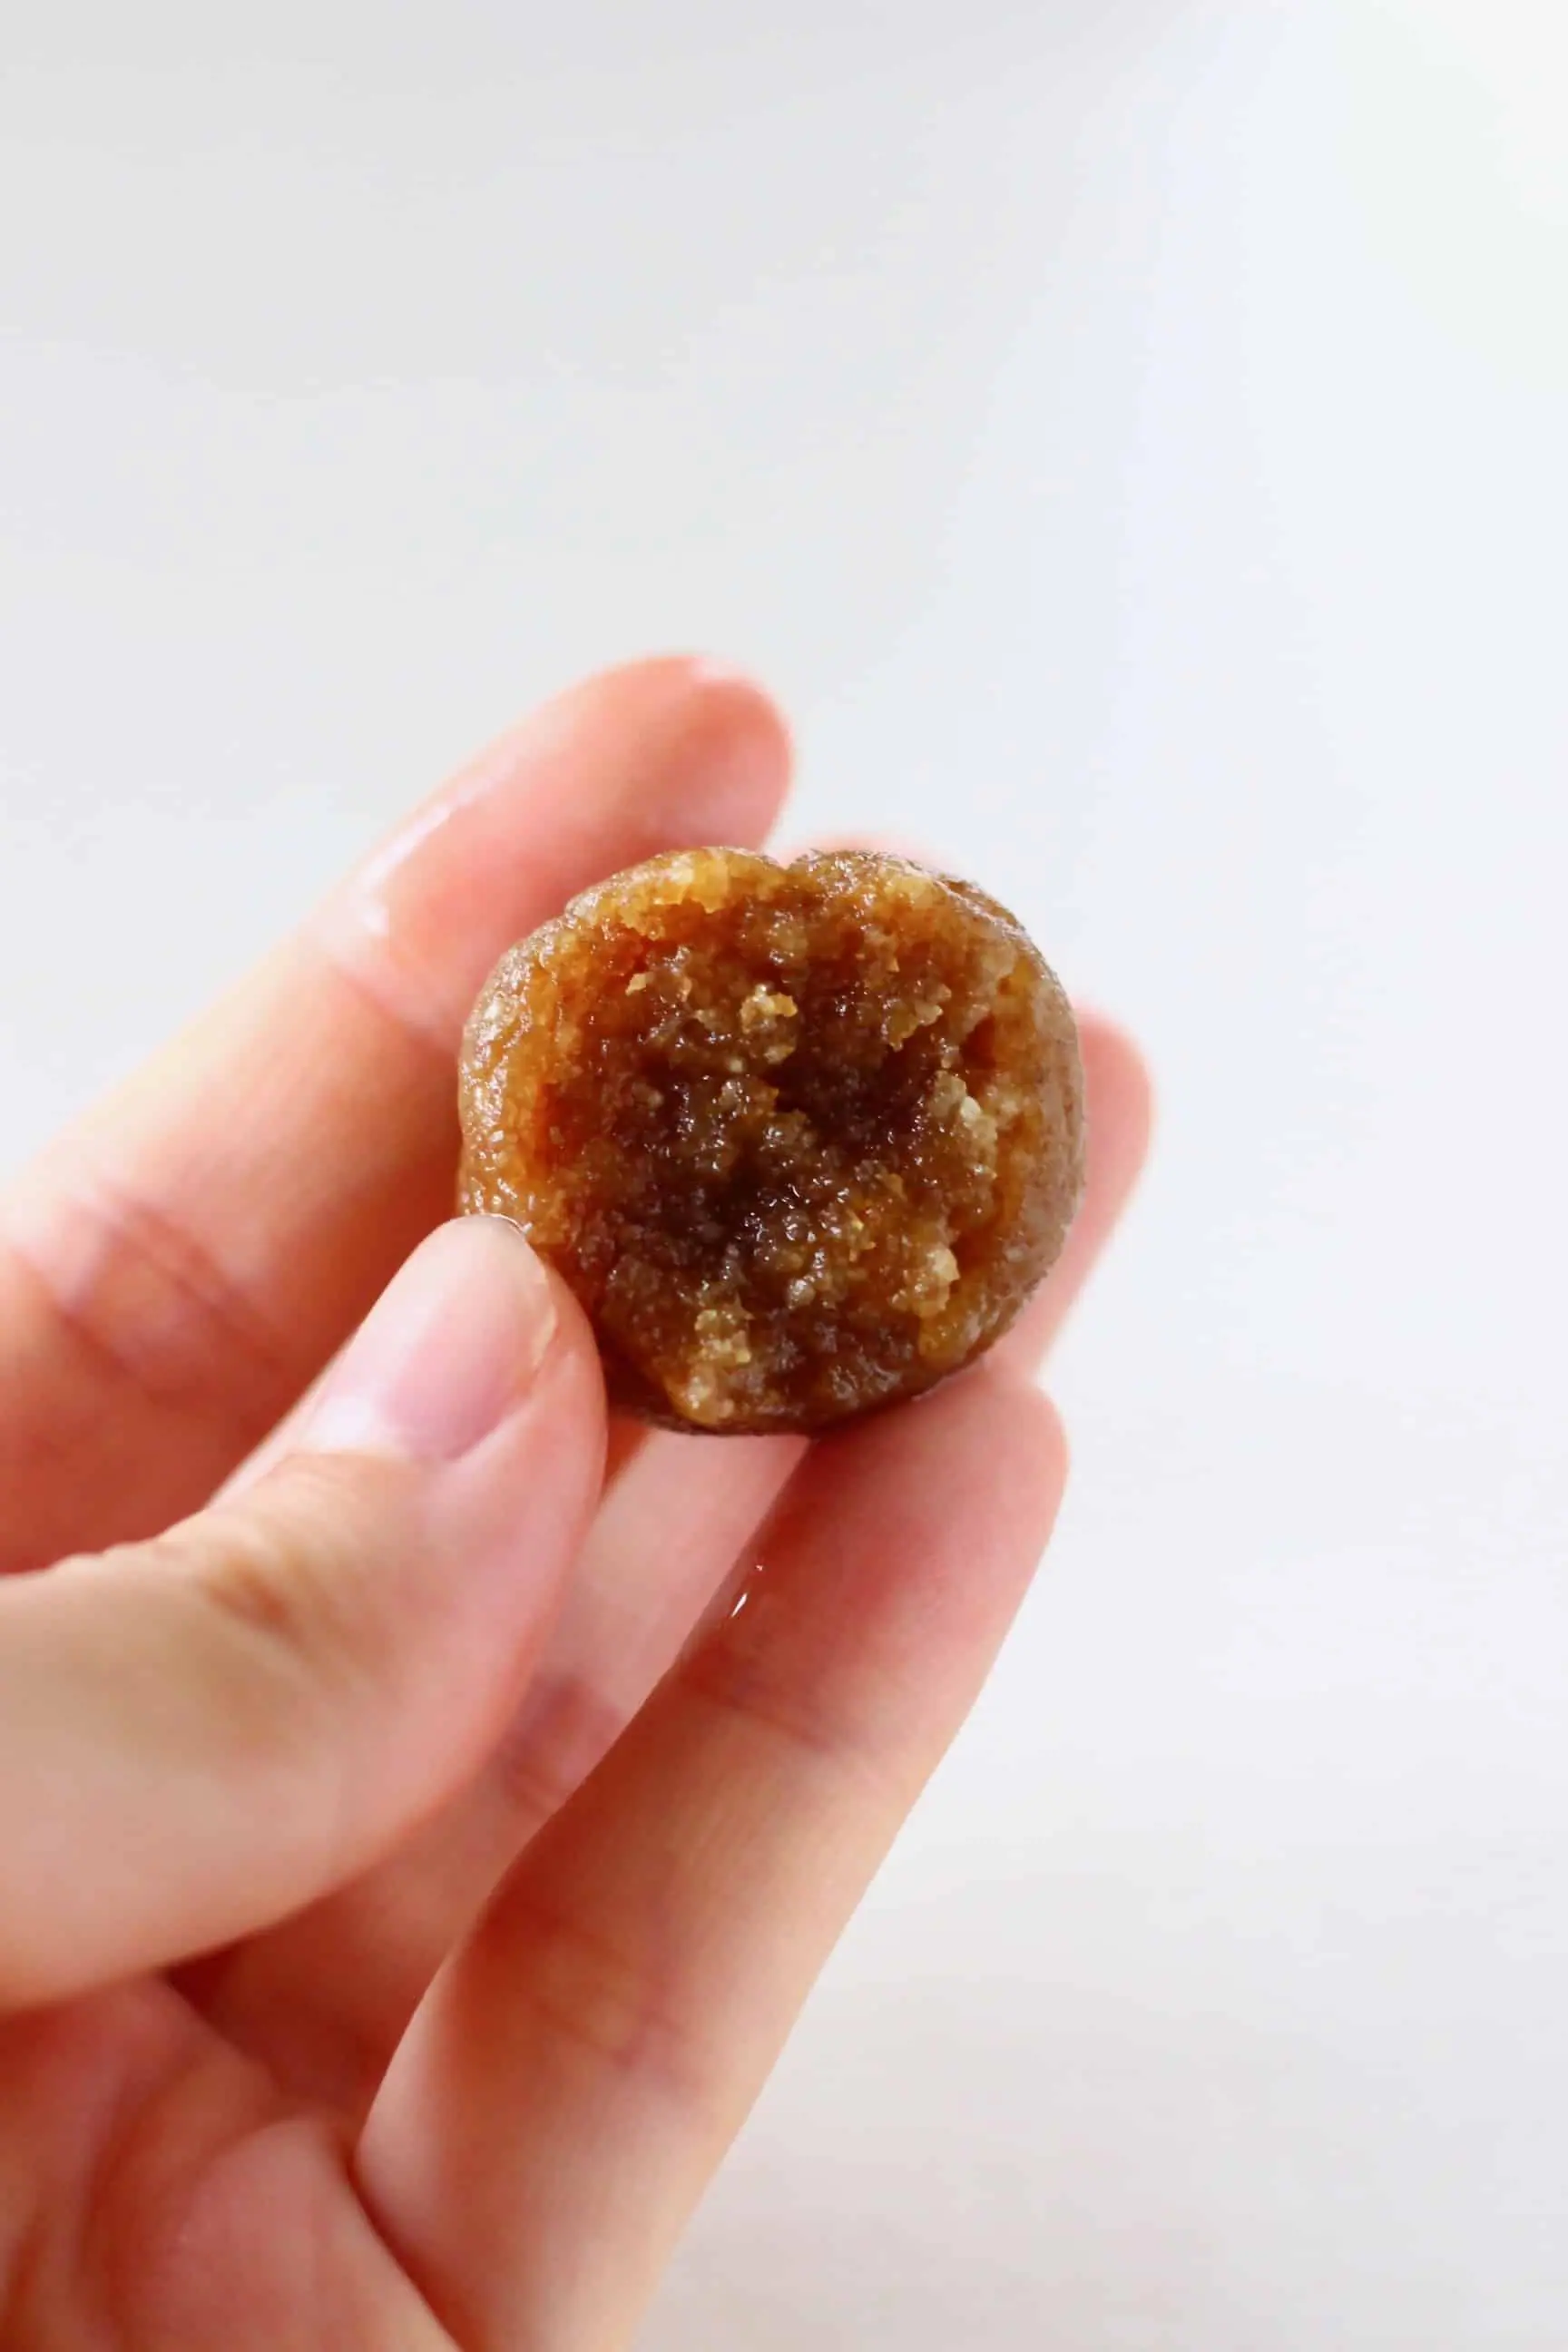 A round brown vegan energy ball with a bite taken out of it being held up